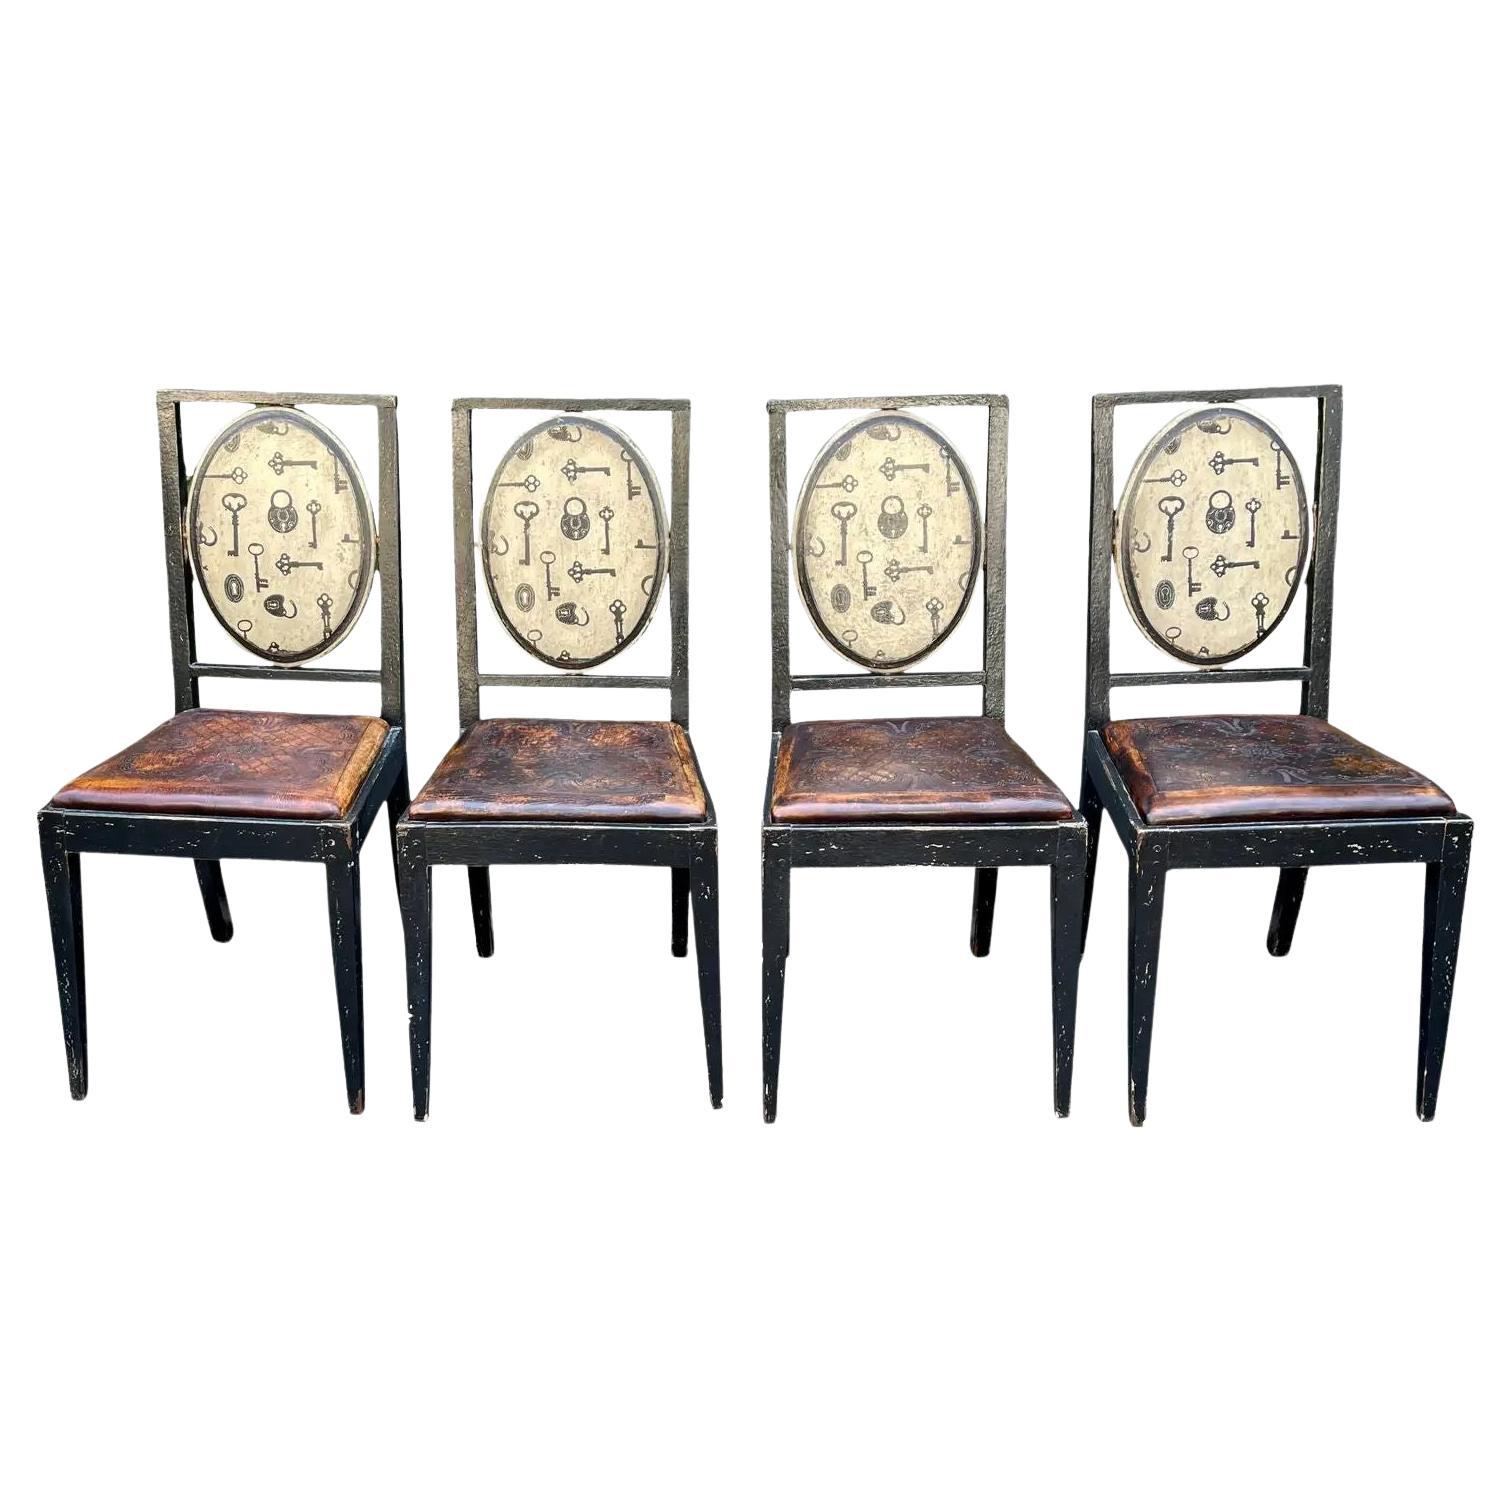 Set of 4 Equator Furniture Company Rustic Tooled Leather Painted Chair, 1990s